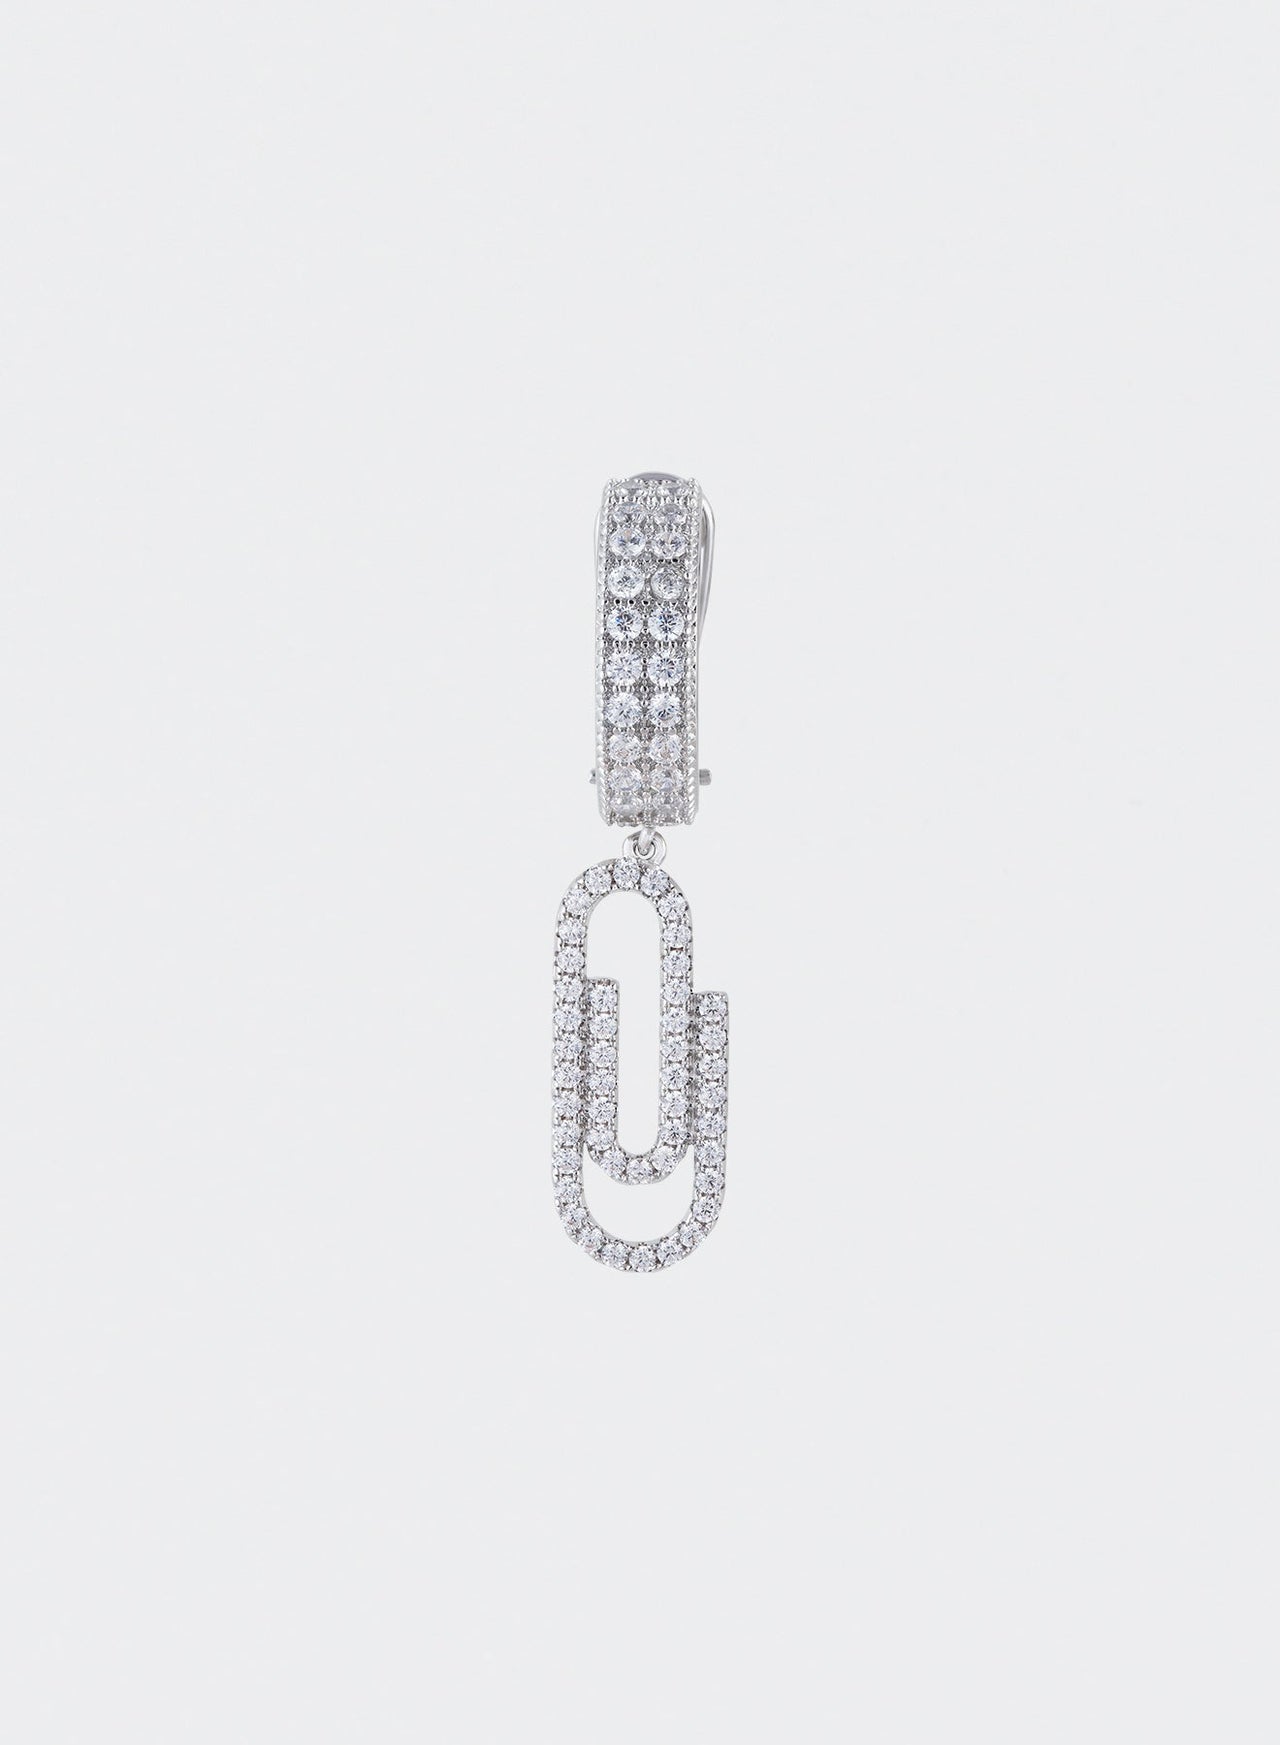 18k white gold coated paperclip mono earring with oversize hoop and hand-set micropavé stones in white